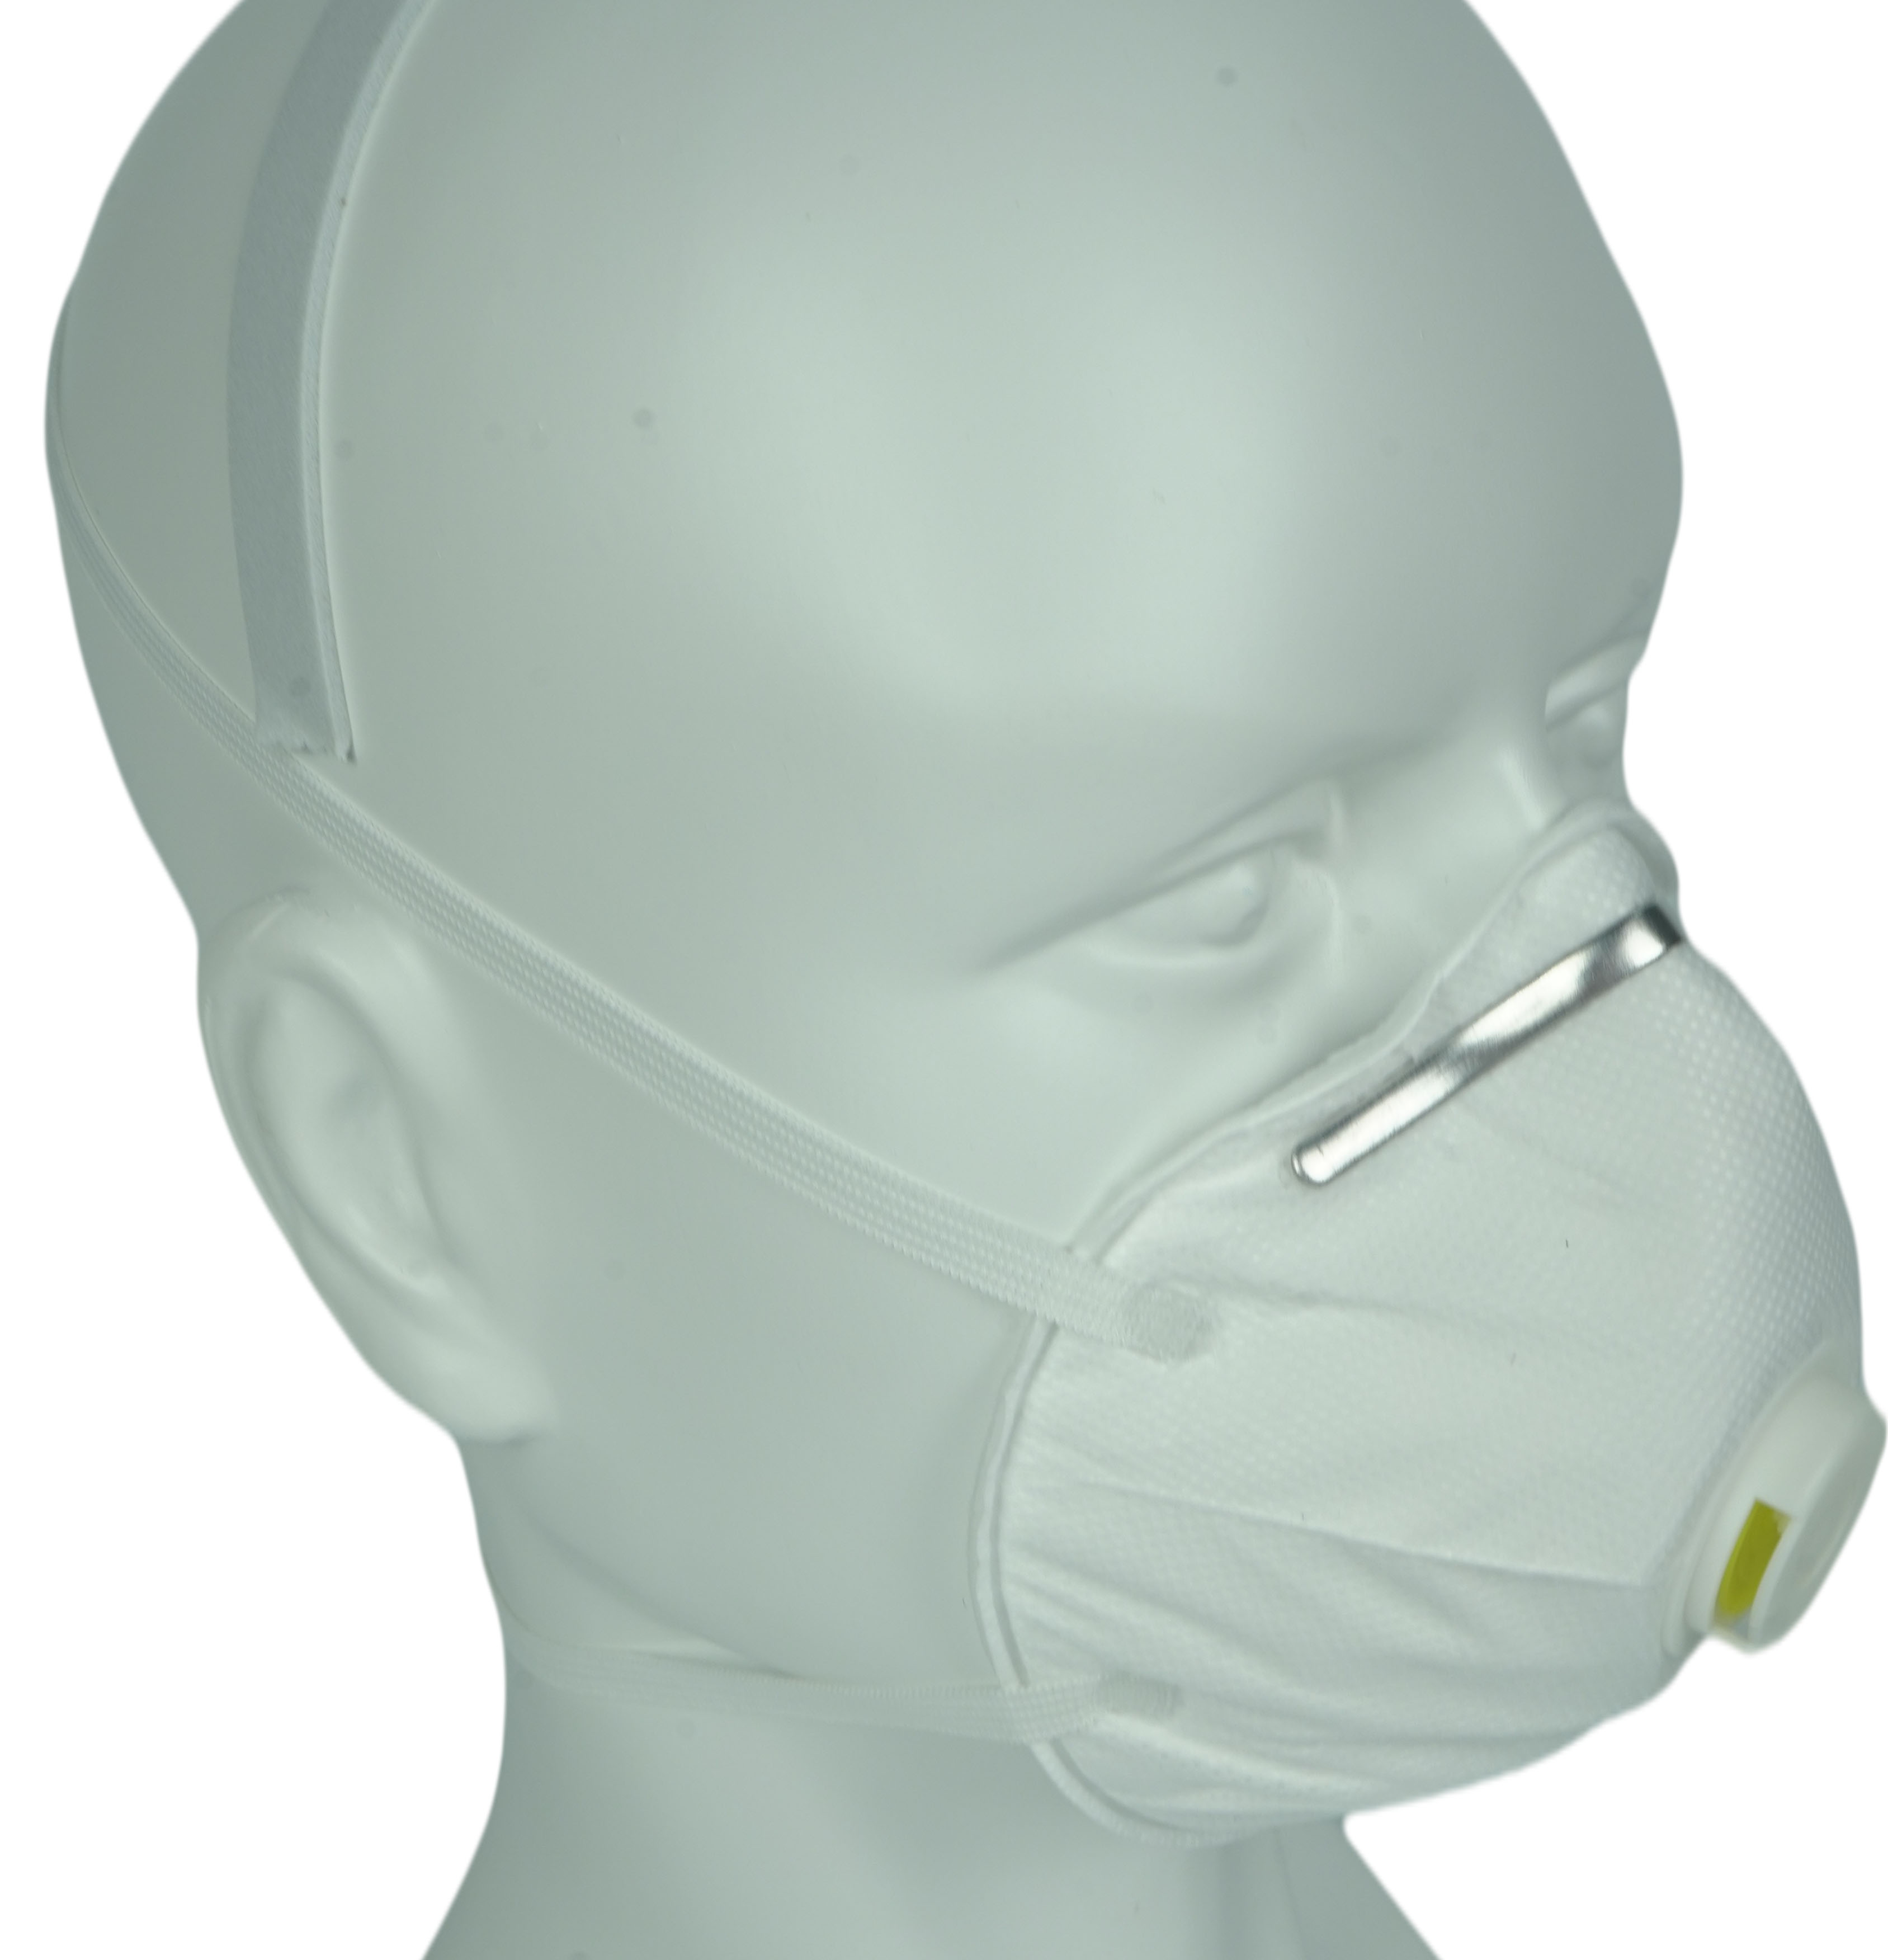 Cup type non-medical protective mask with valve